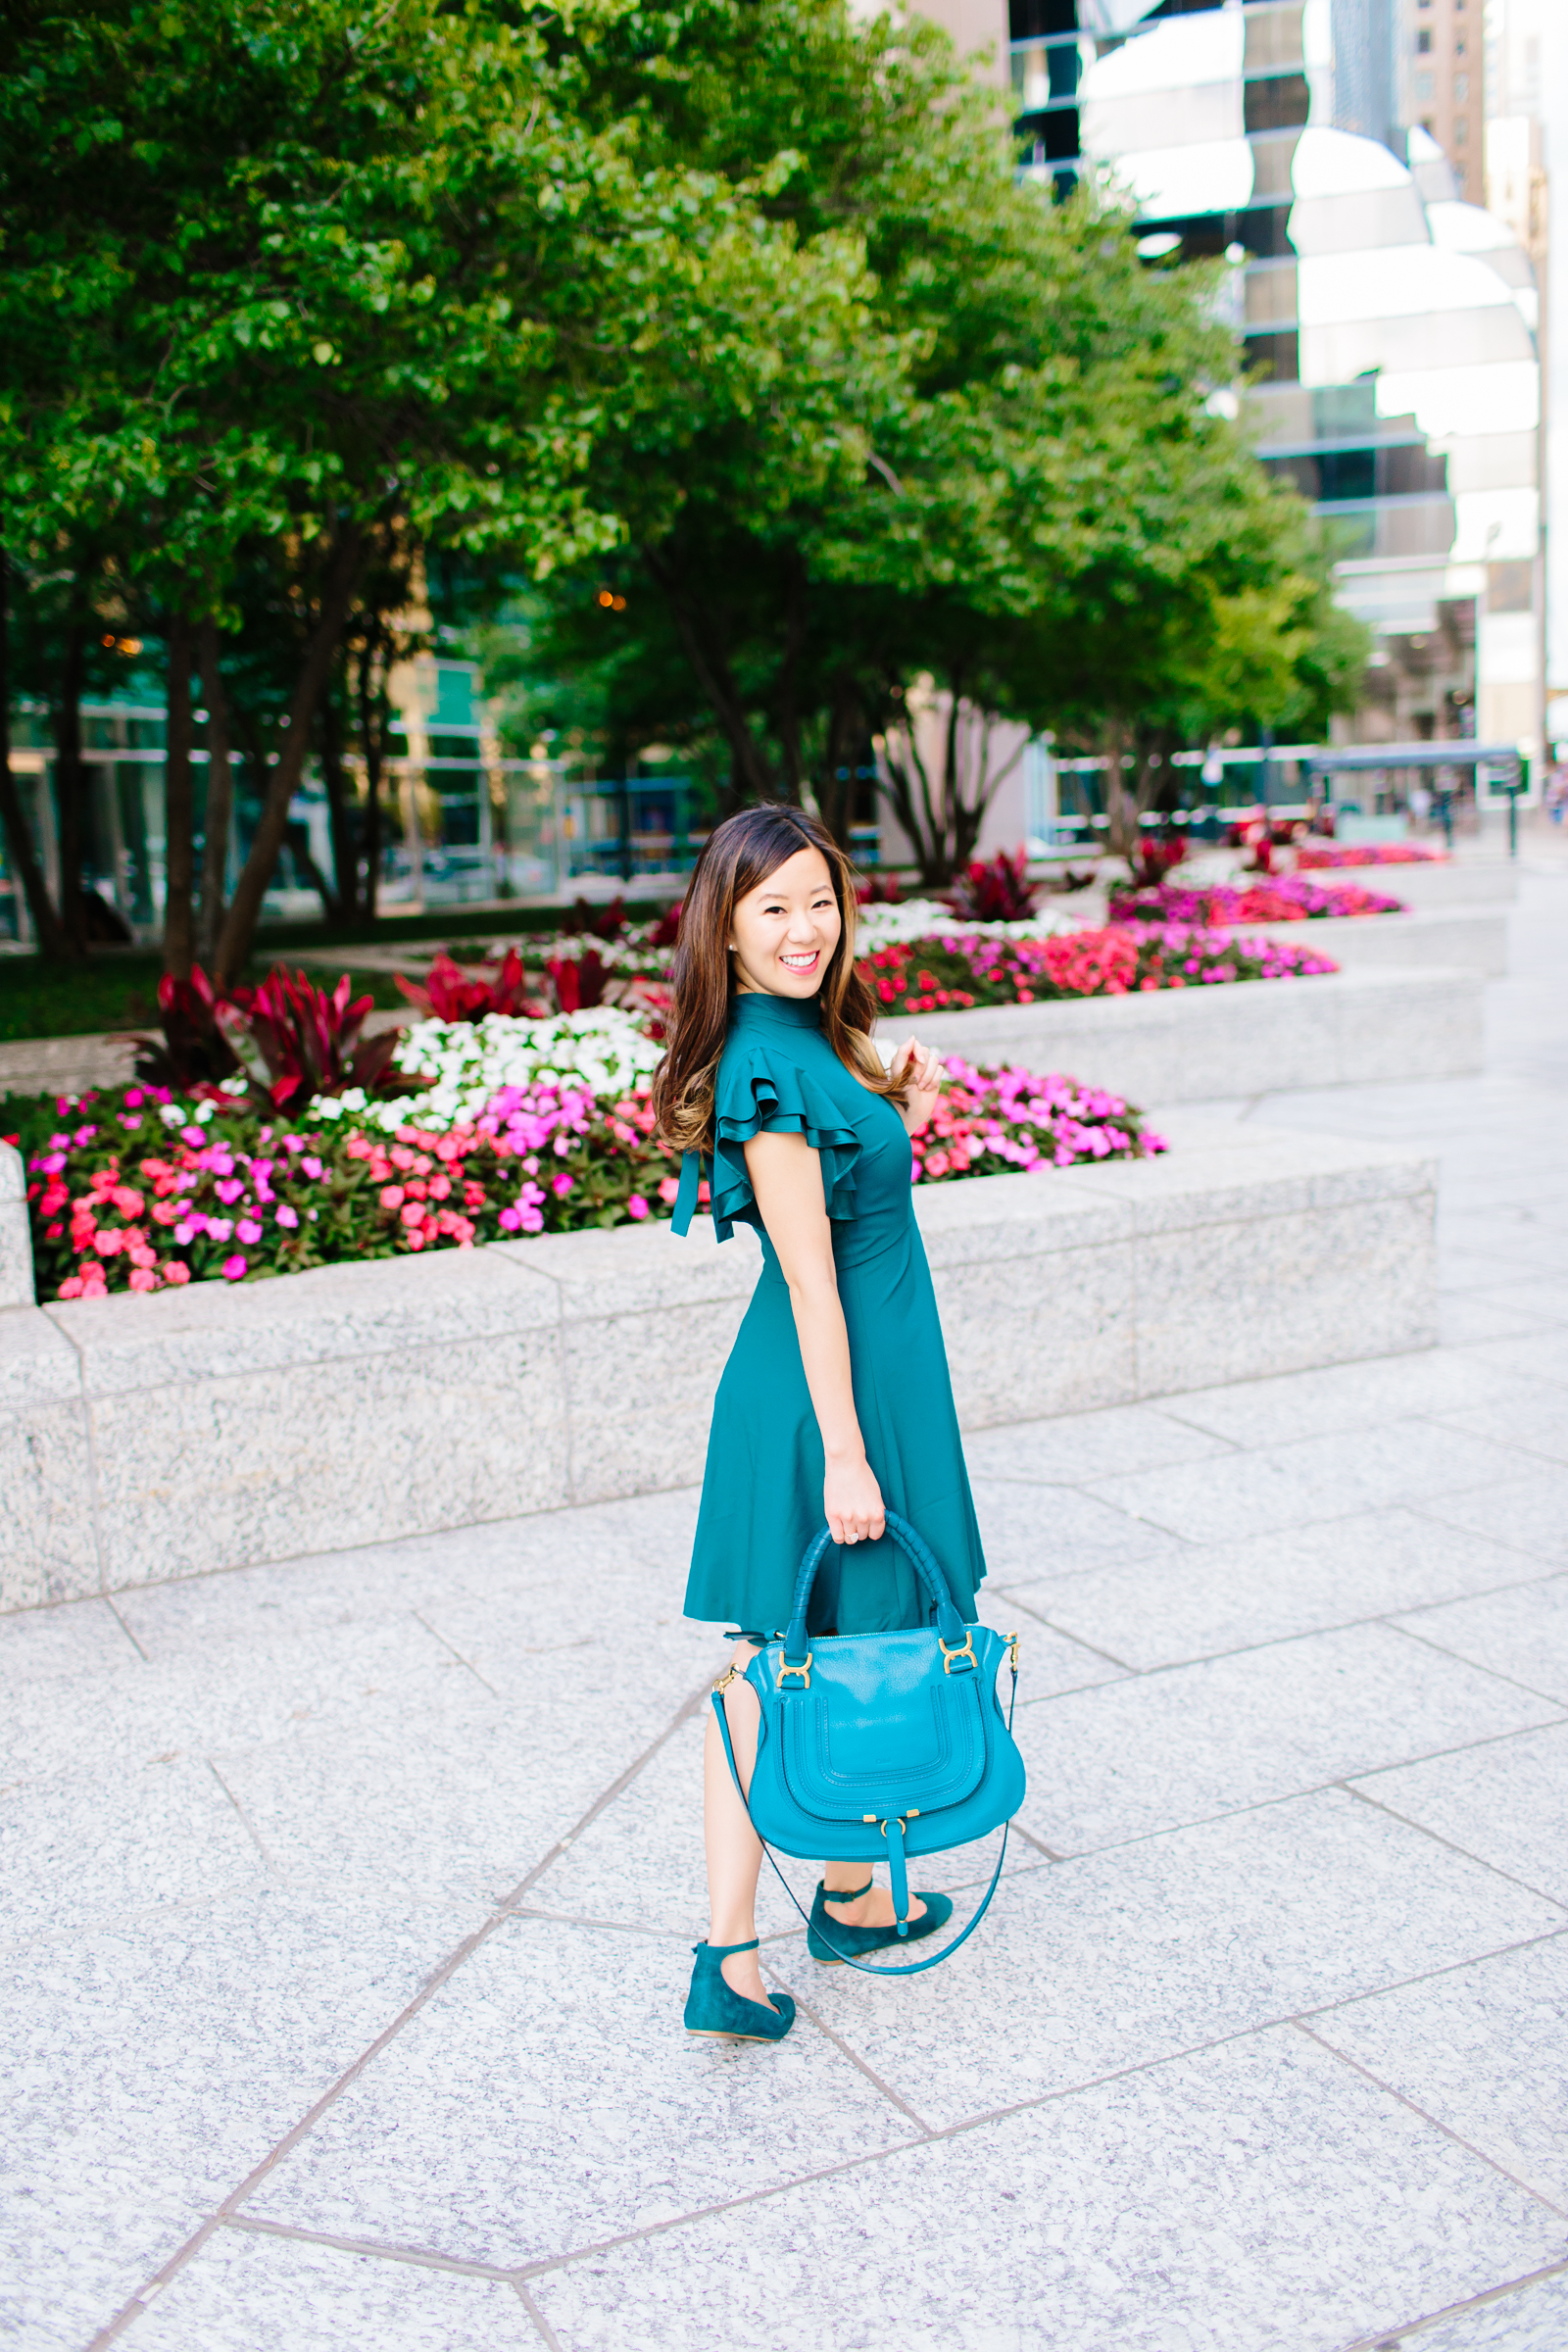 Chelsea28 Teal Crepe Fit and Flare Ruffle Sleeve Dress, Never Have I Ever - Beauty Edition, Tia Perciballi Fashion & Lifestyle Blog